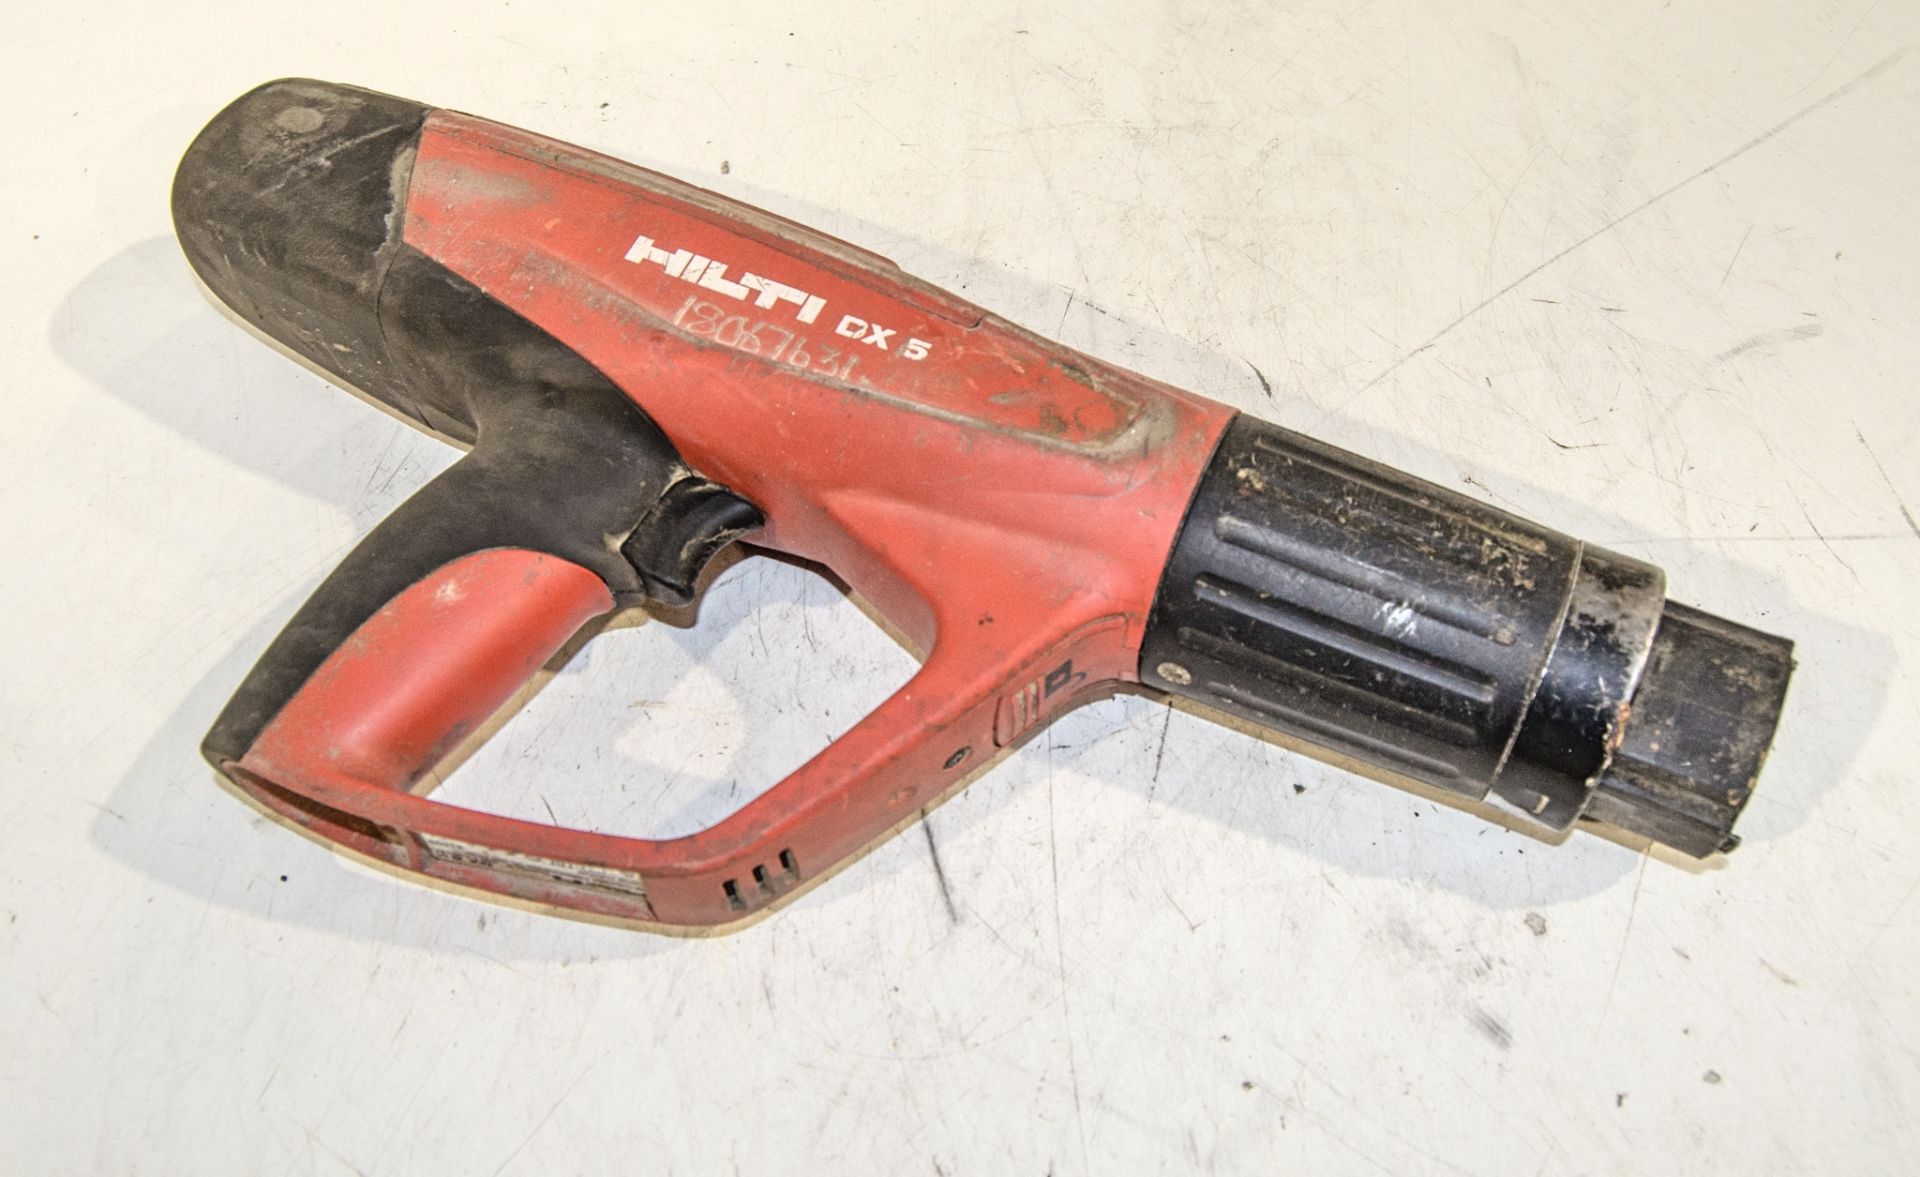 Hilti DX5 nail gun for spares 18067631 - Image 2 of 2